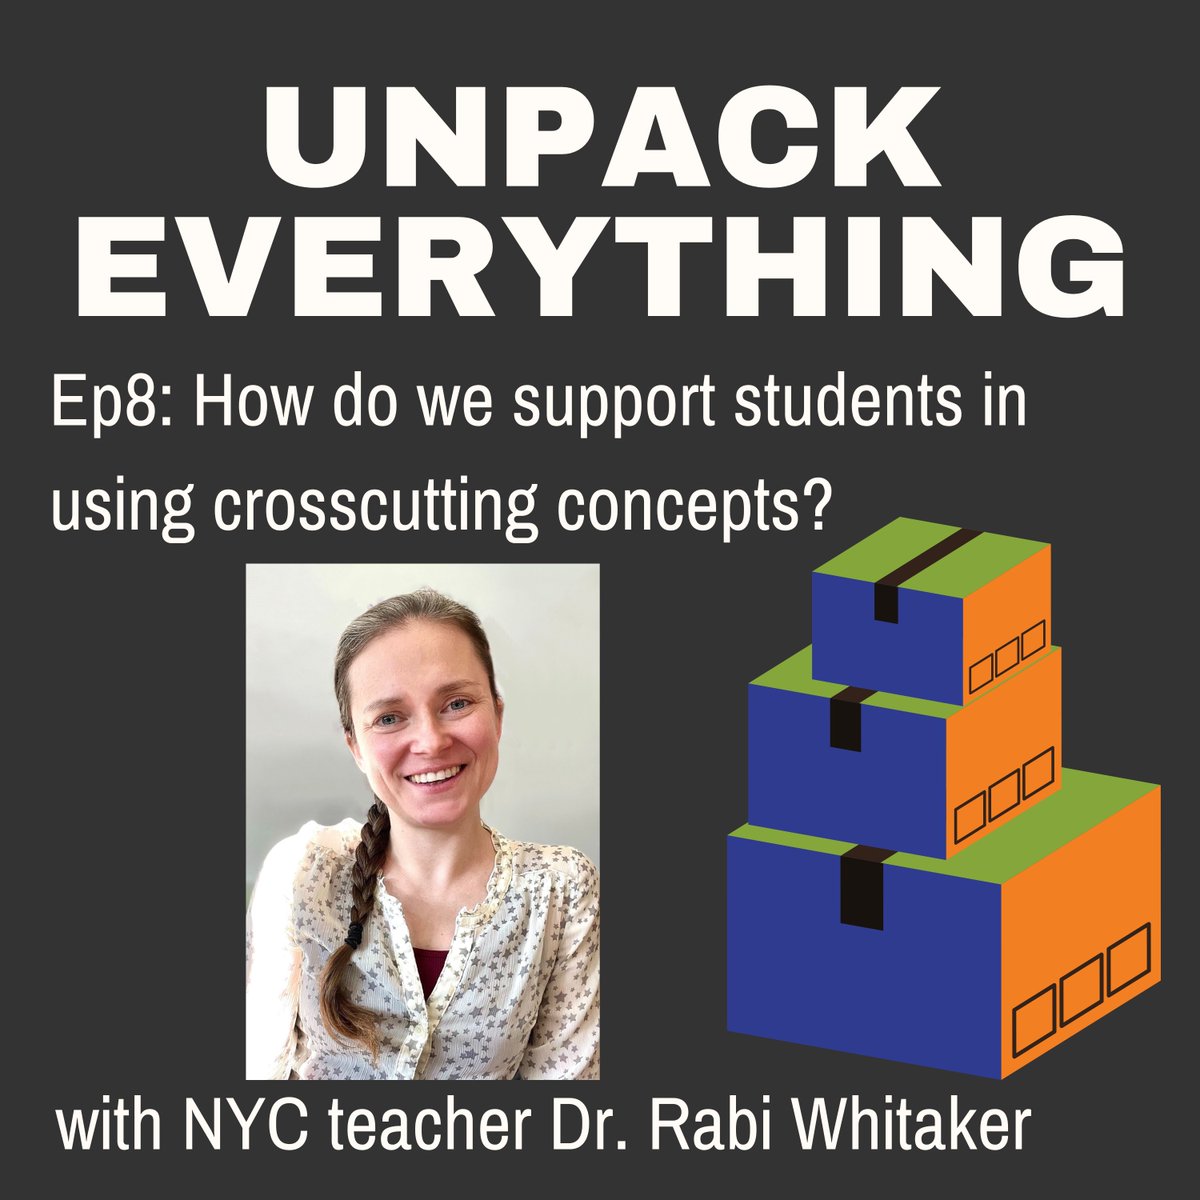 Happy Saturday y'all! We continue our two-episode discussion of #CCCs with NYC teacher Rabi Whitaker! open.spotify.com/episode/2skxAa…